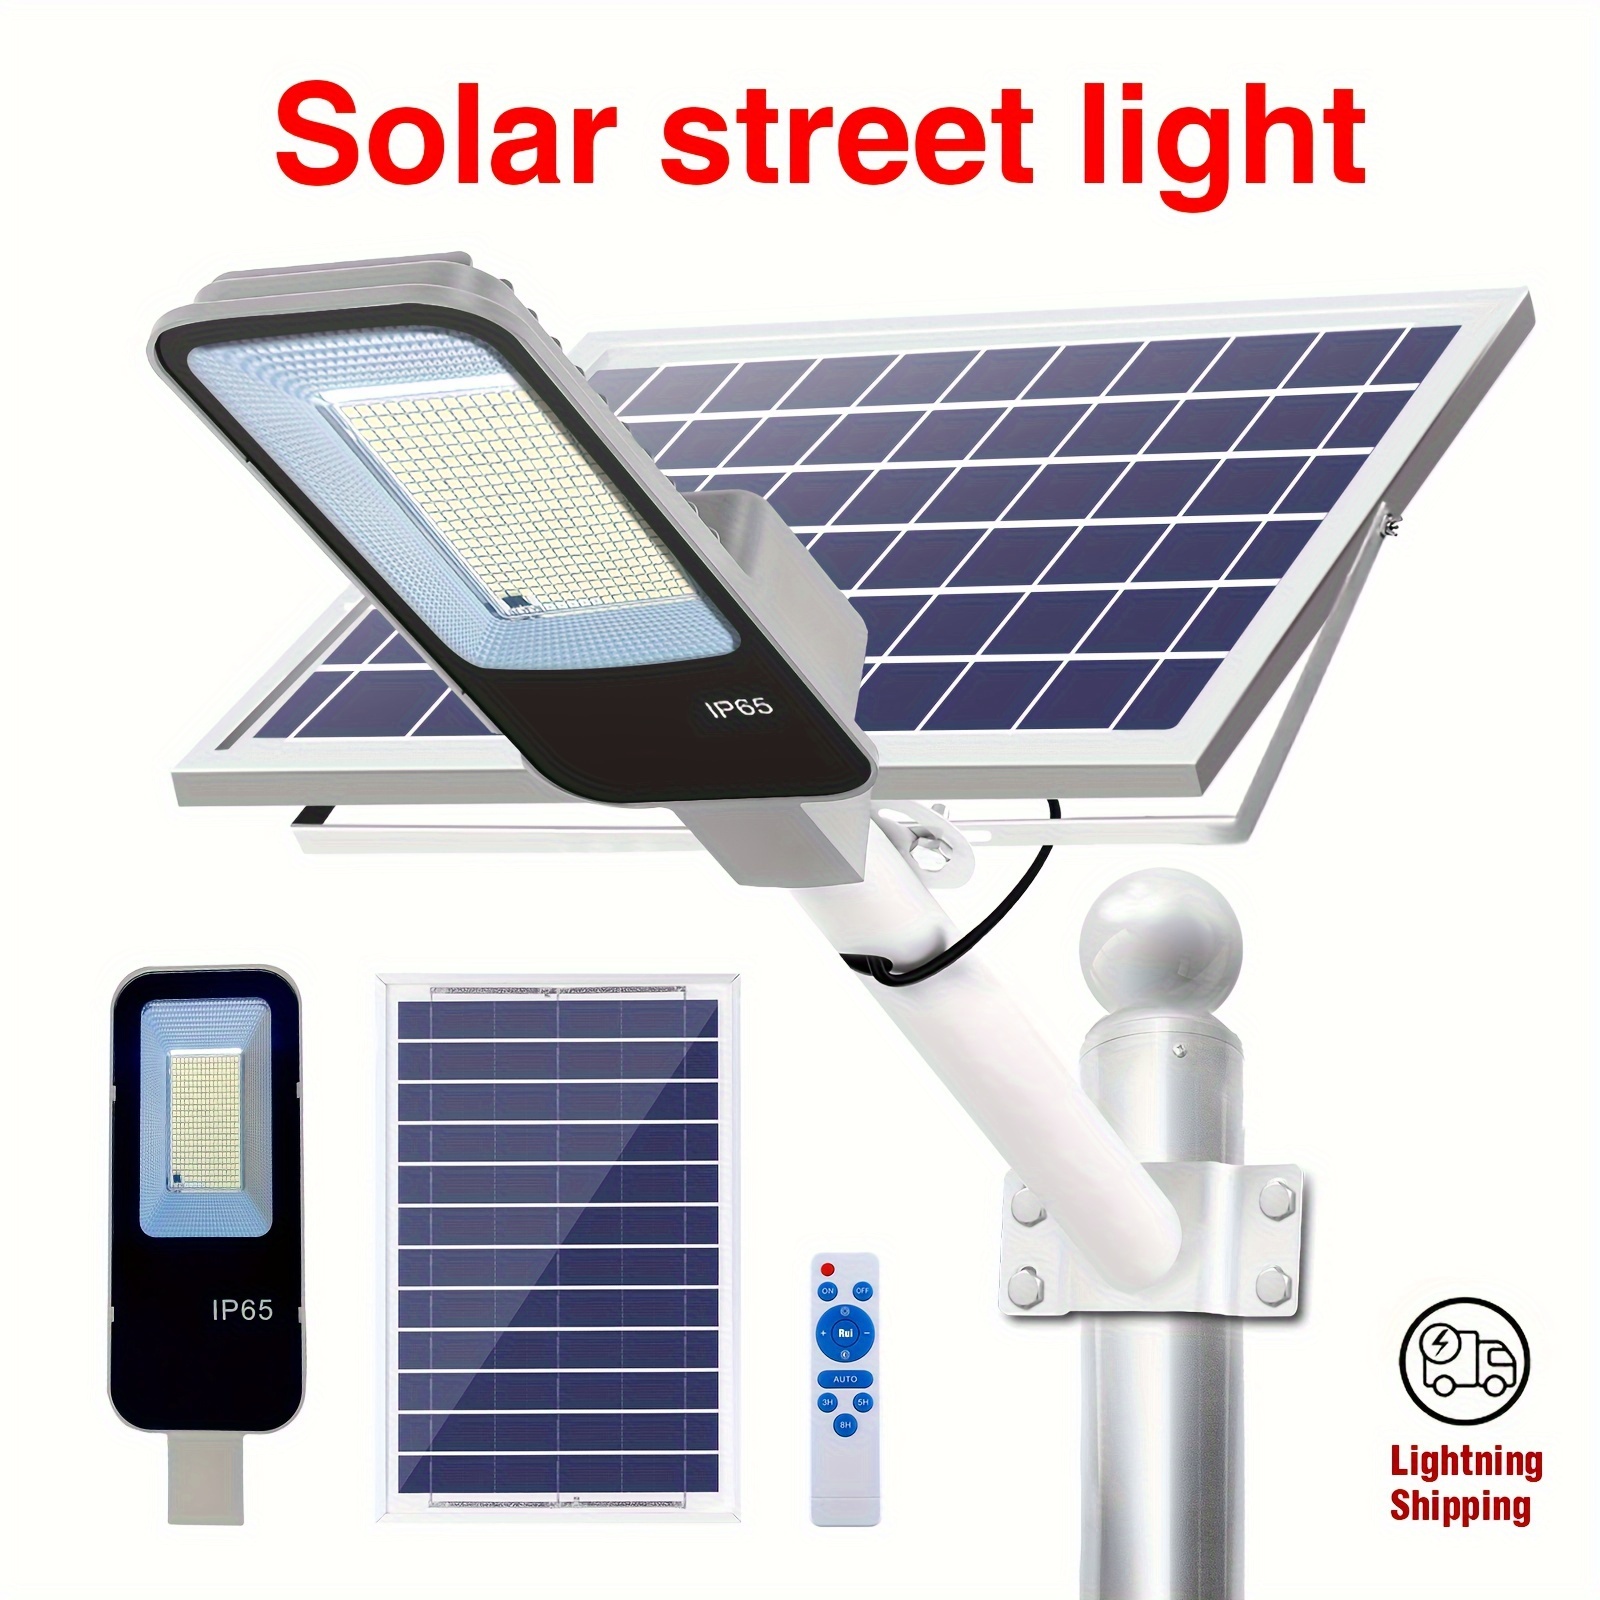 

1pc, Solar Street Light With 353 Leds, Metal Outdoor Lamp, Solar Panel For Garden, Yard, And Street Lighting